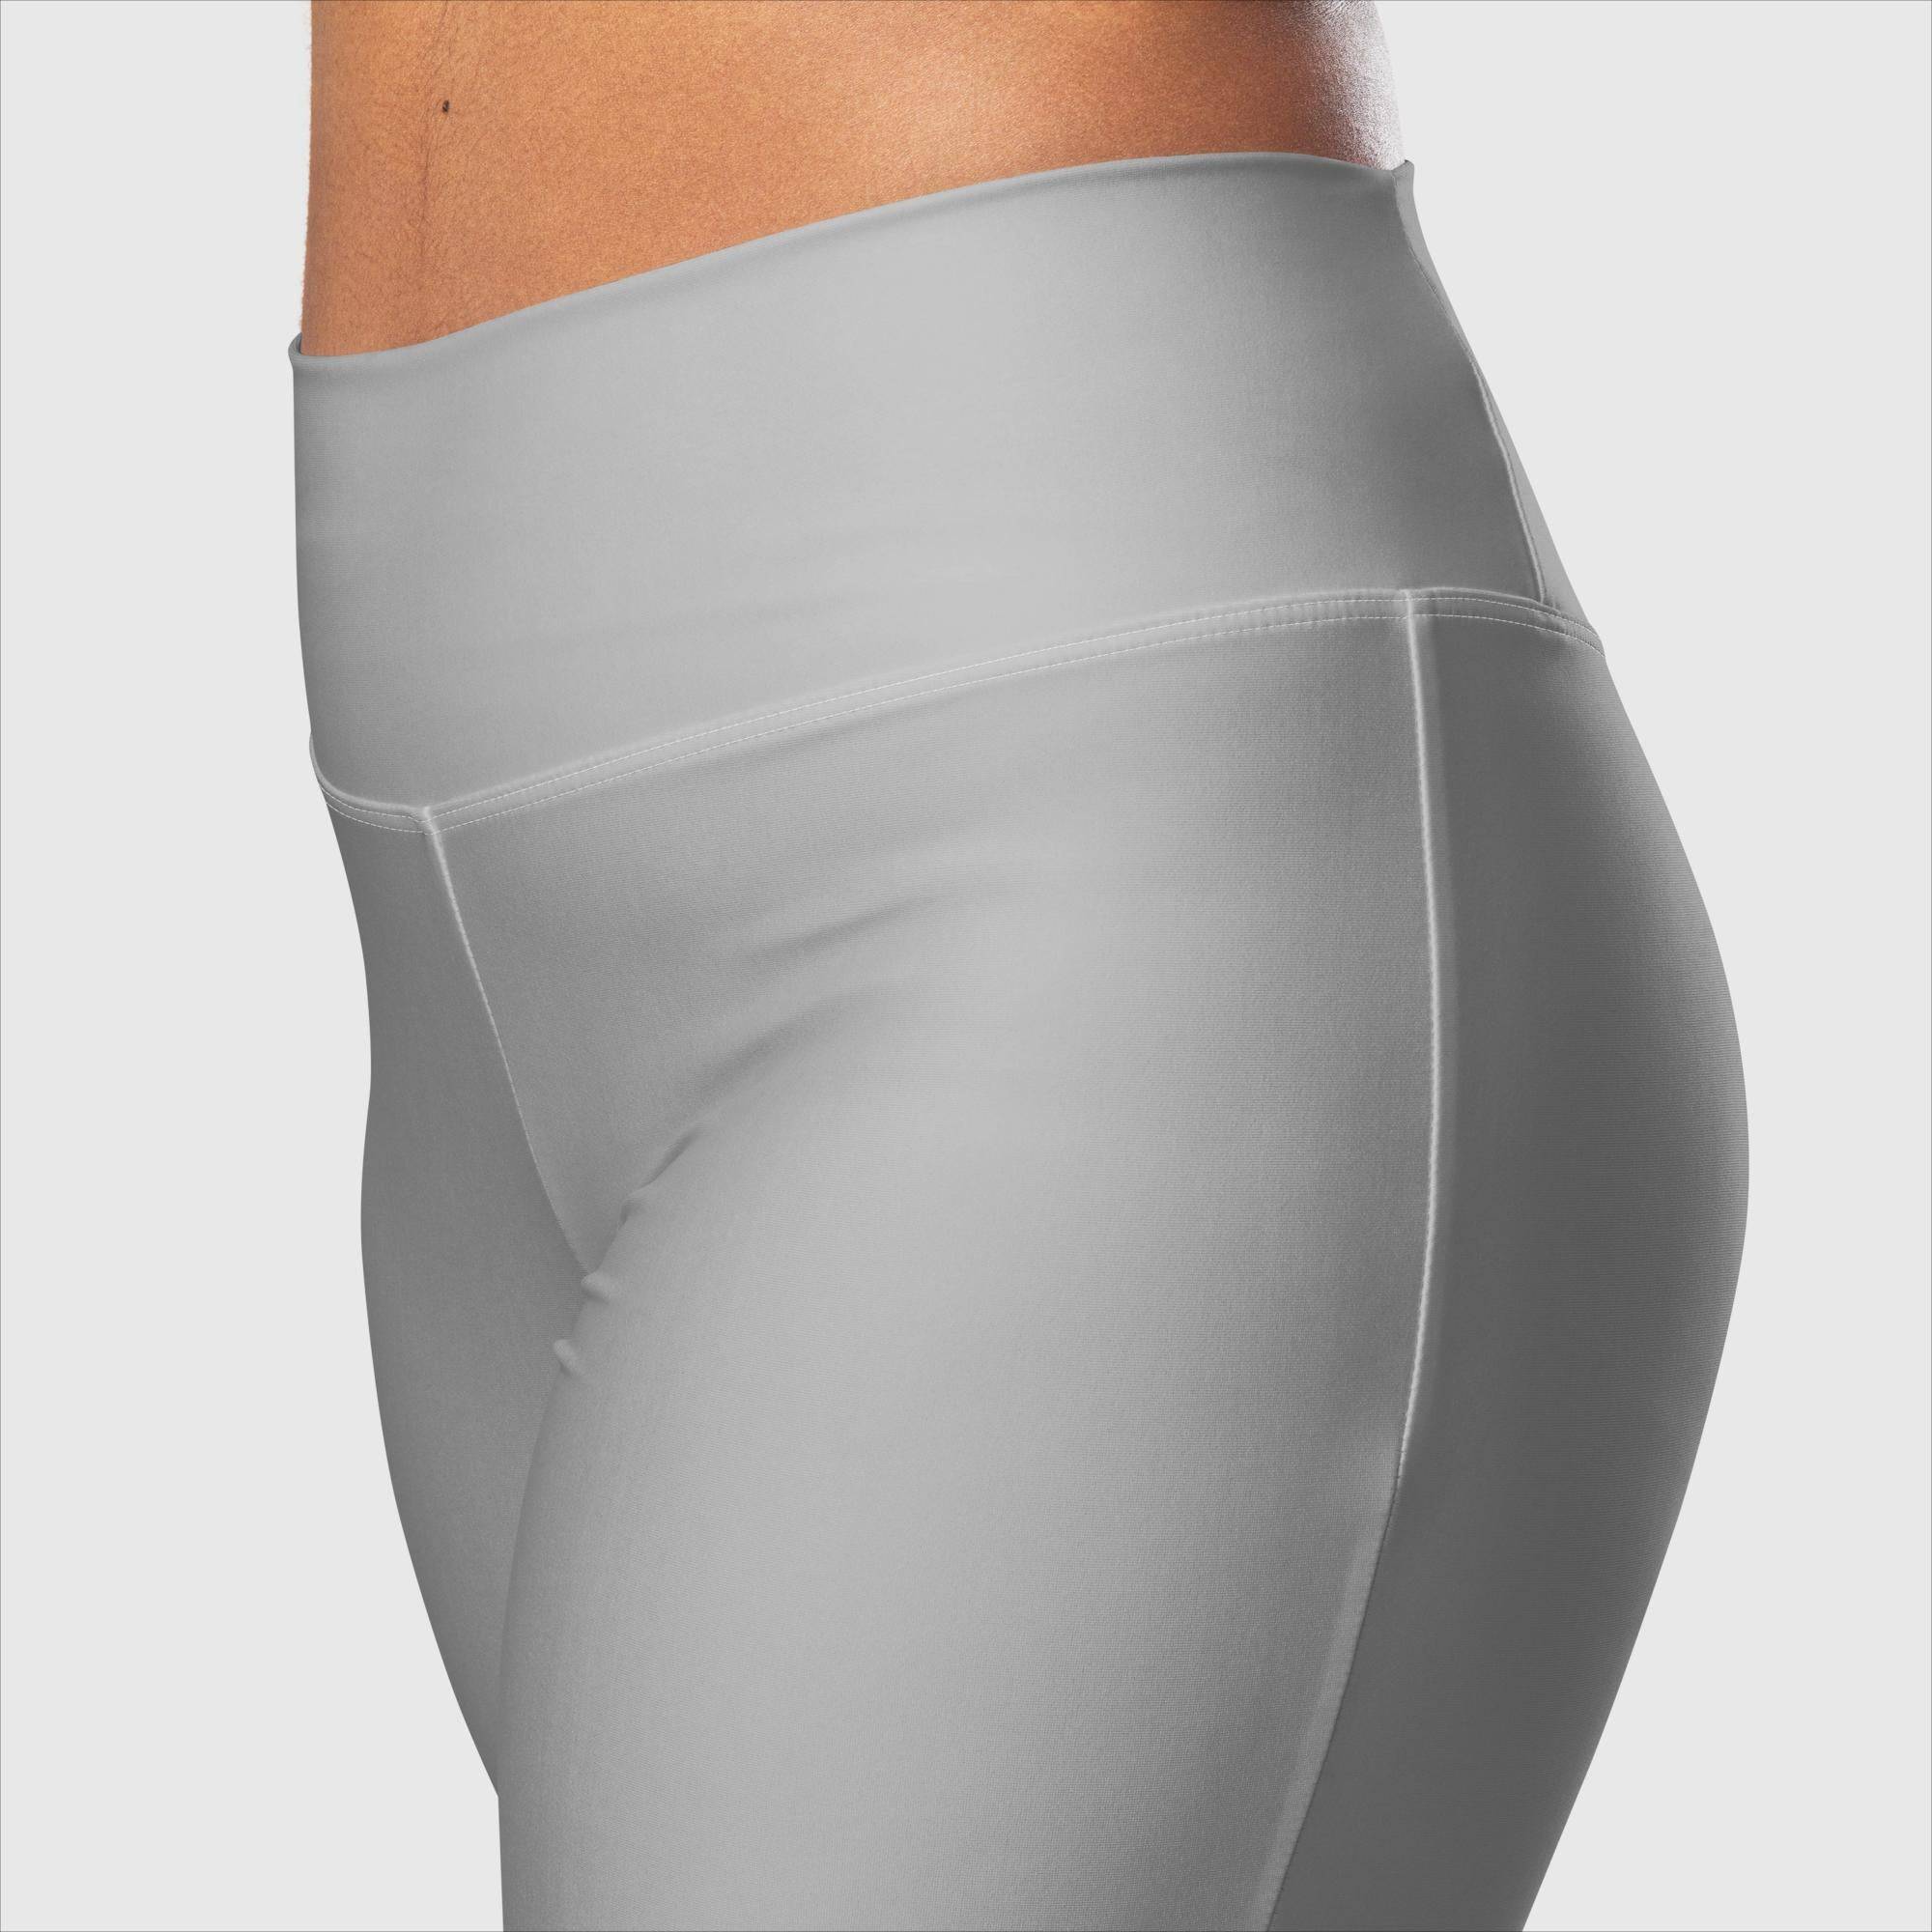 Grey flare leggings close view of front waist band that provides support and prevents leggings from moving out of place.